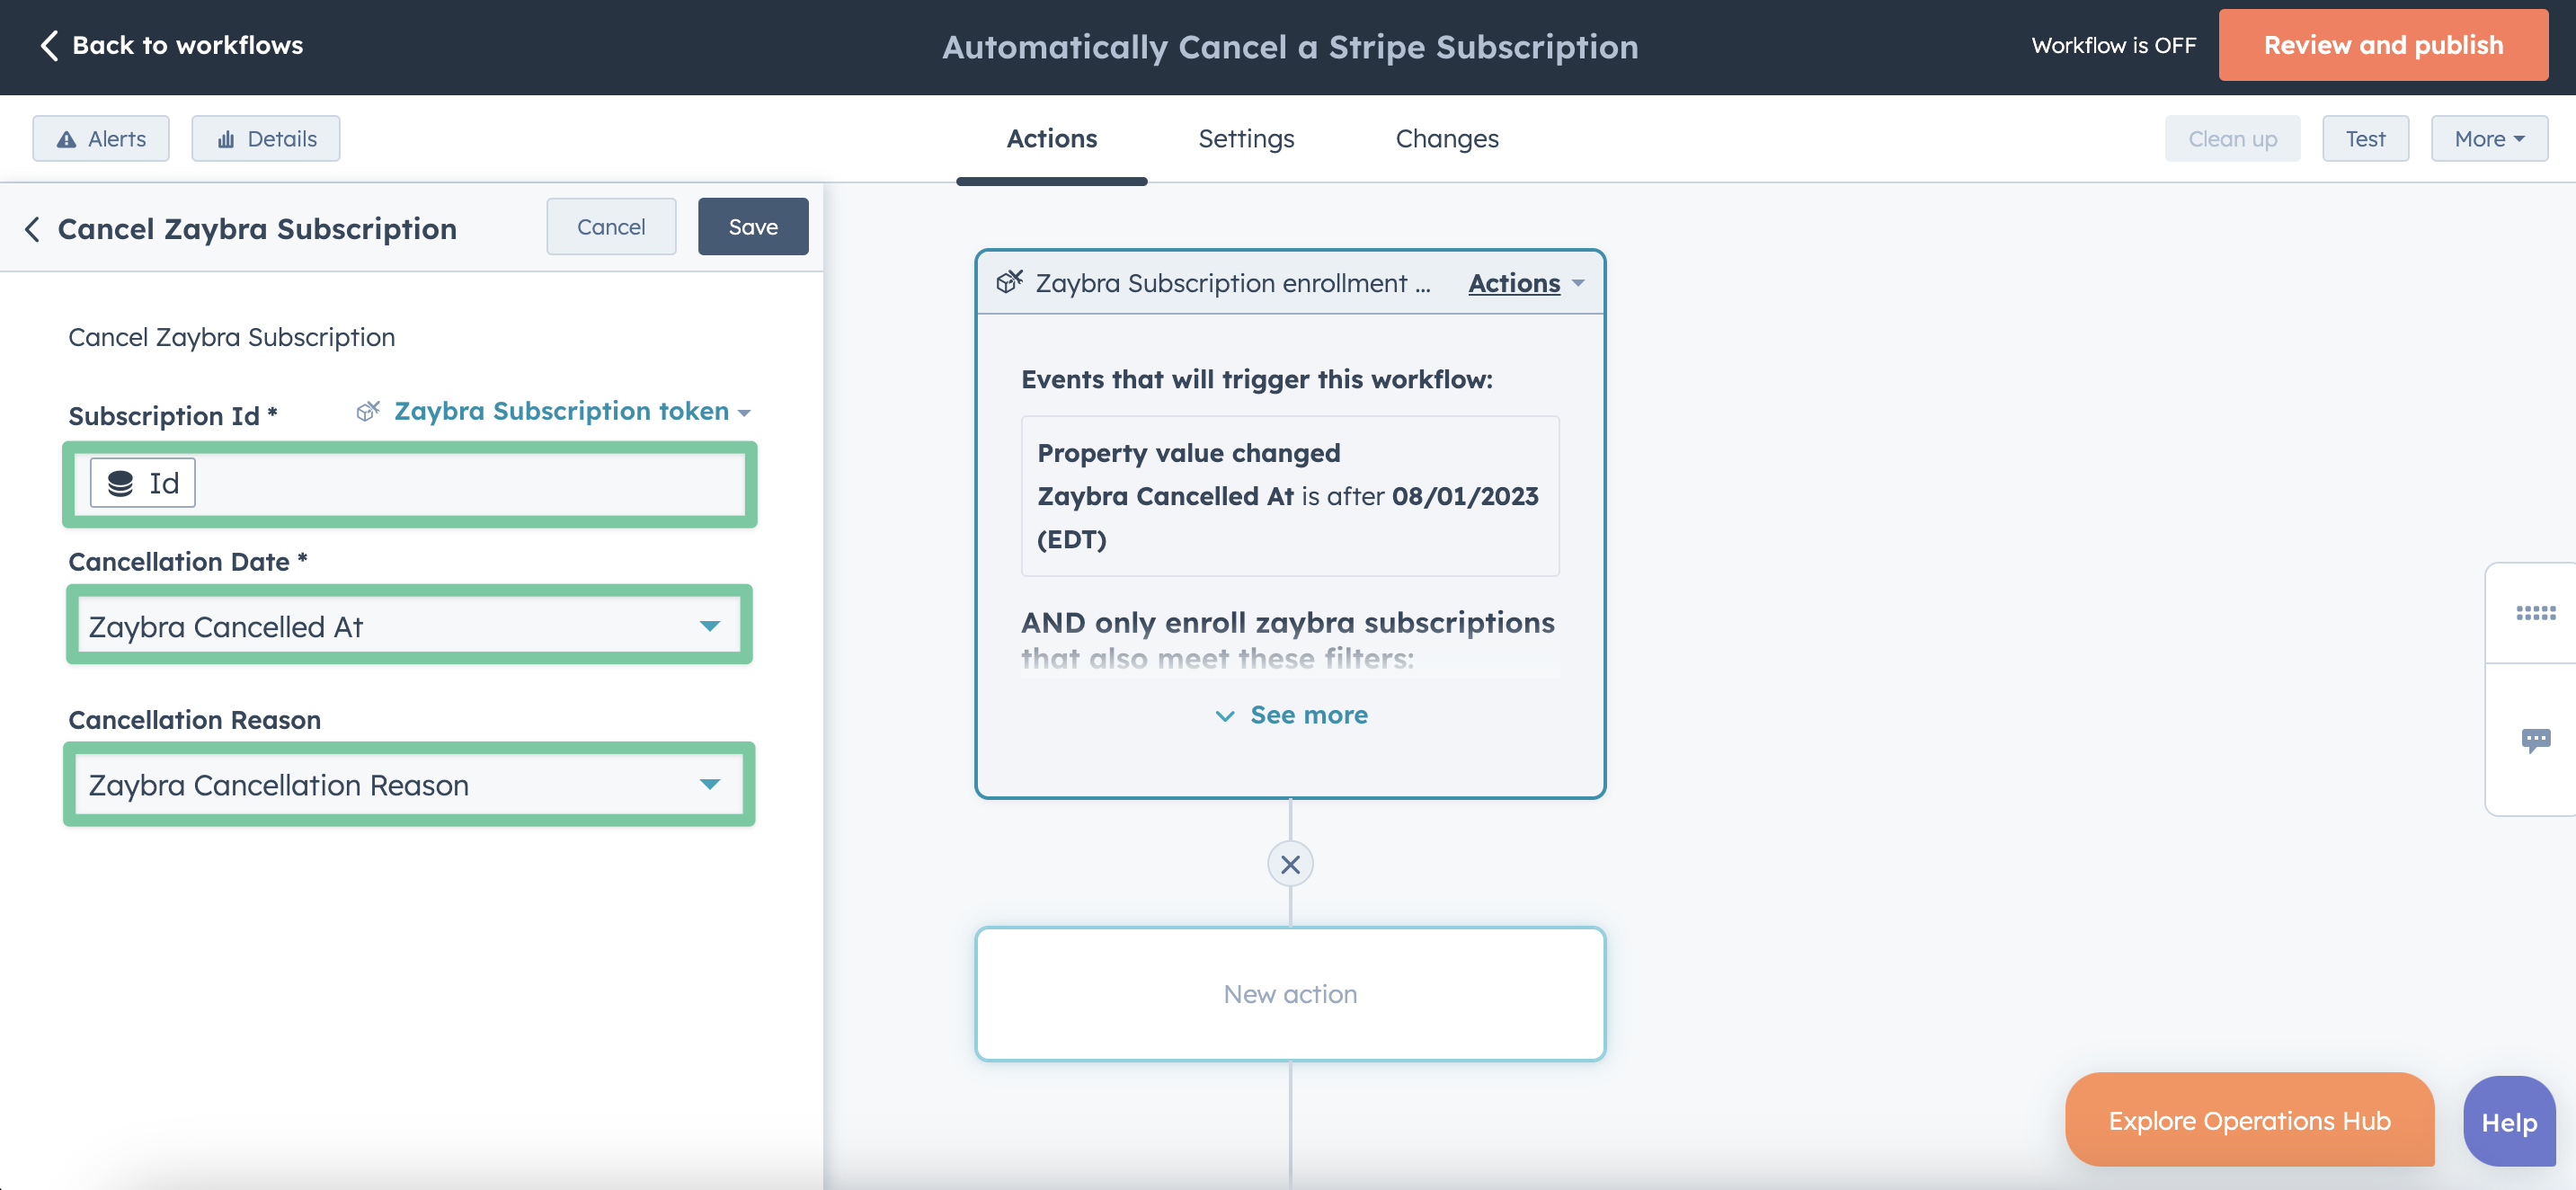 How to automatically cancel a stripe subscription in HubSpot